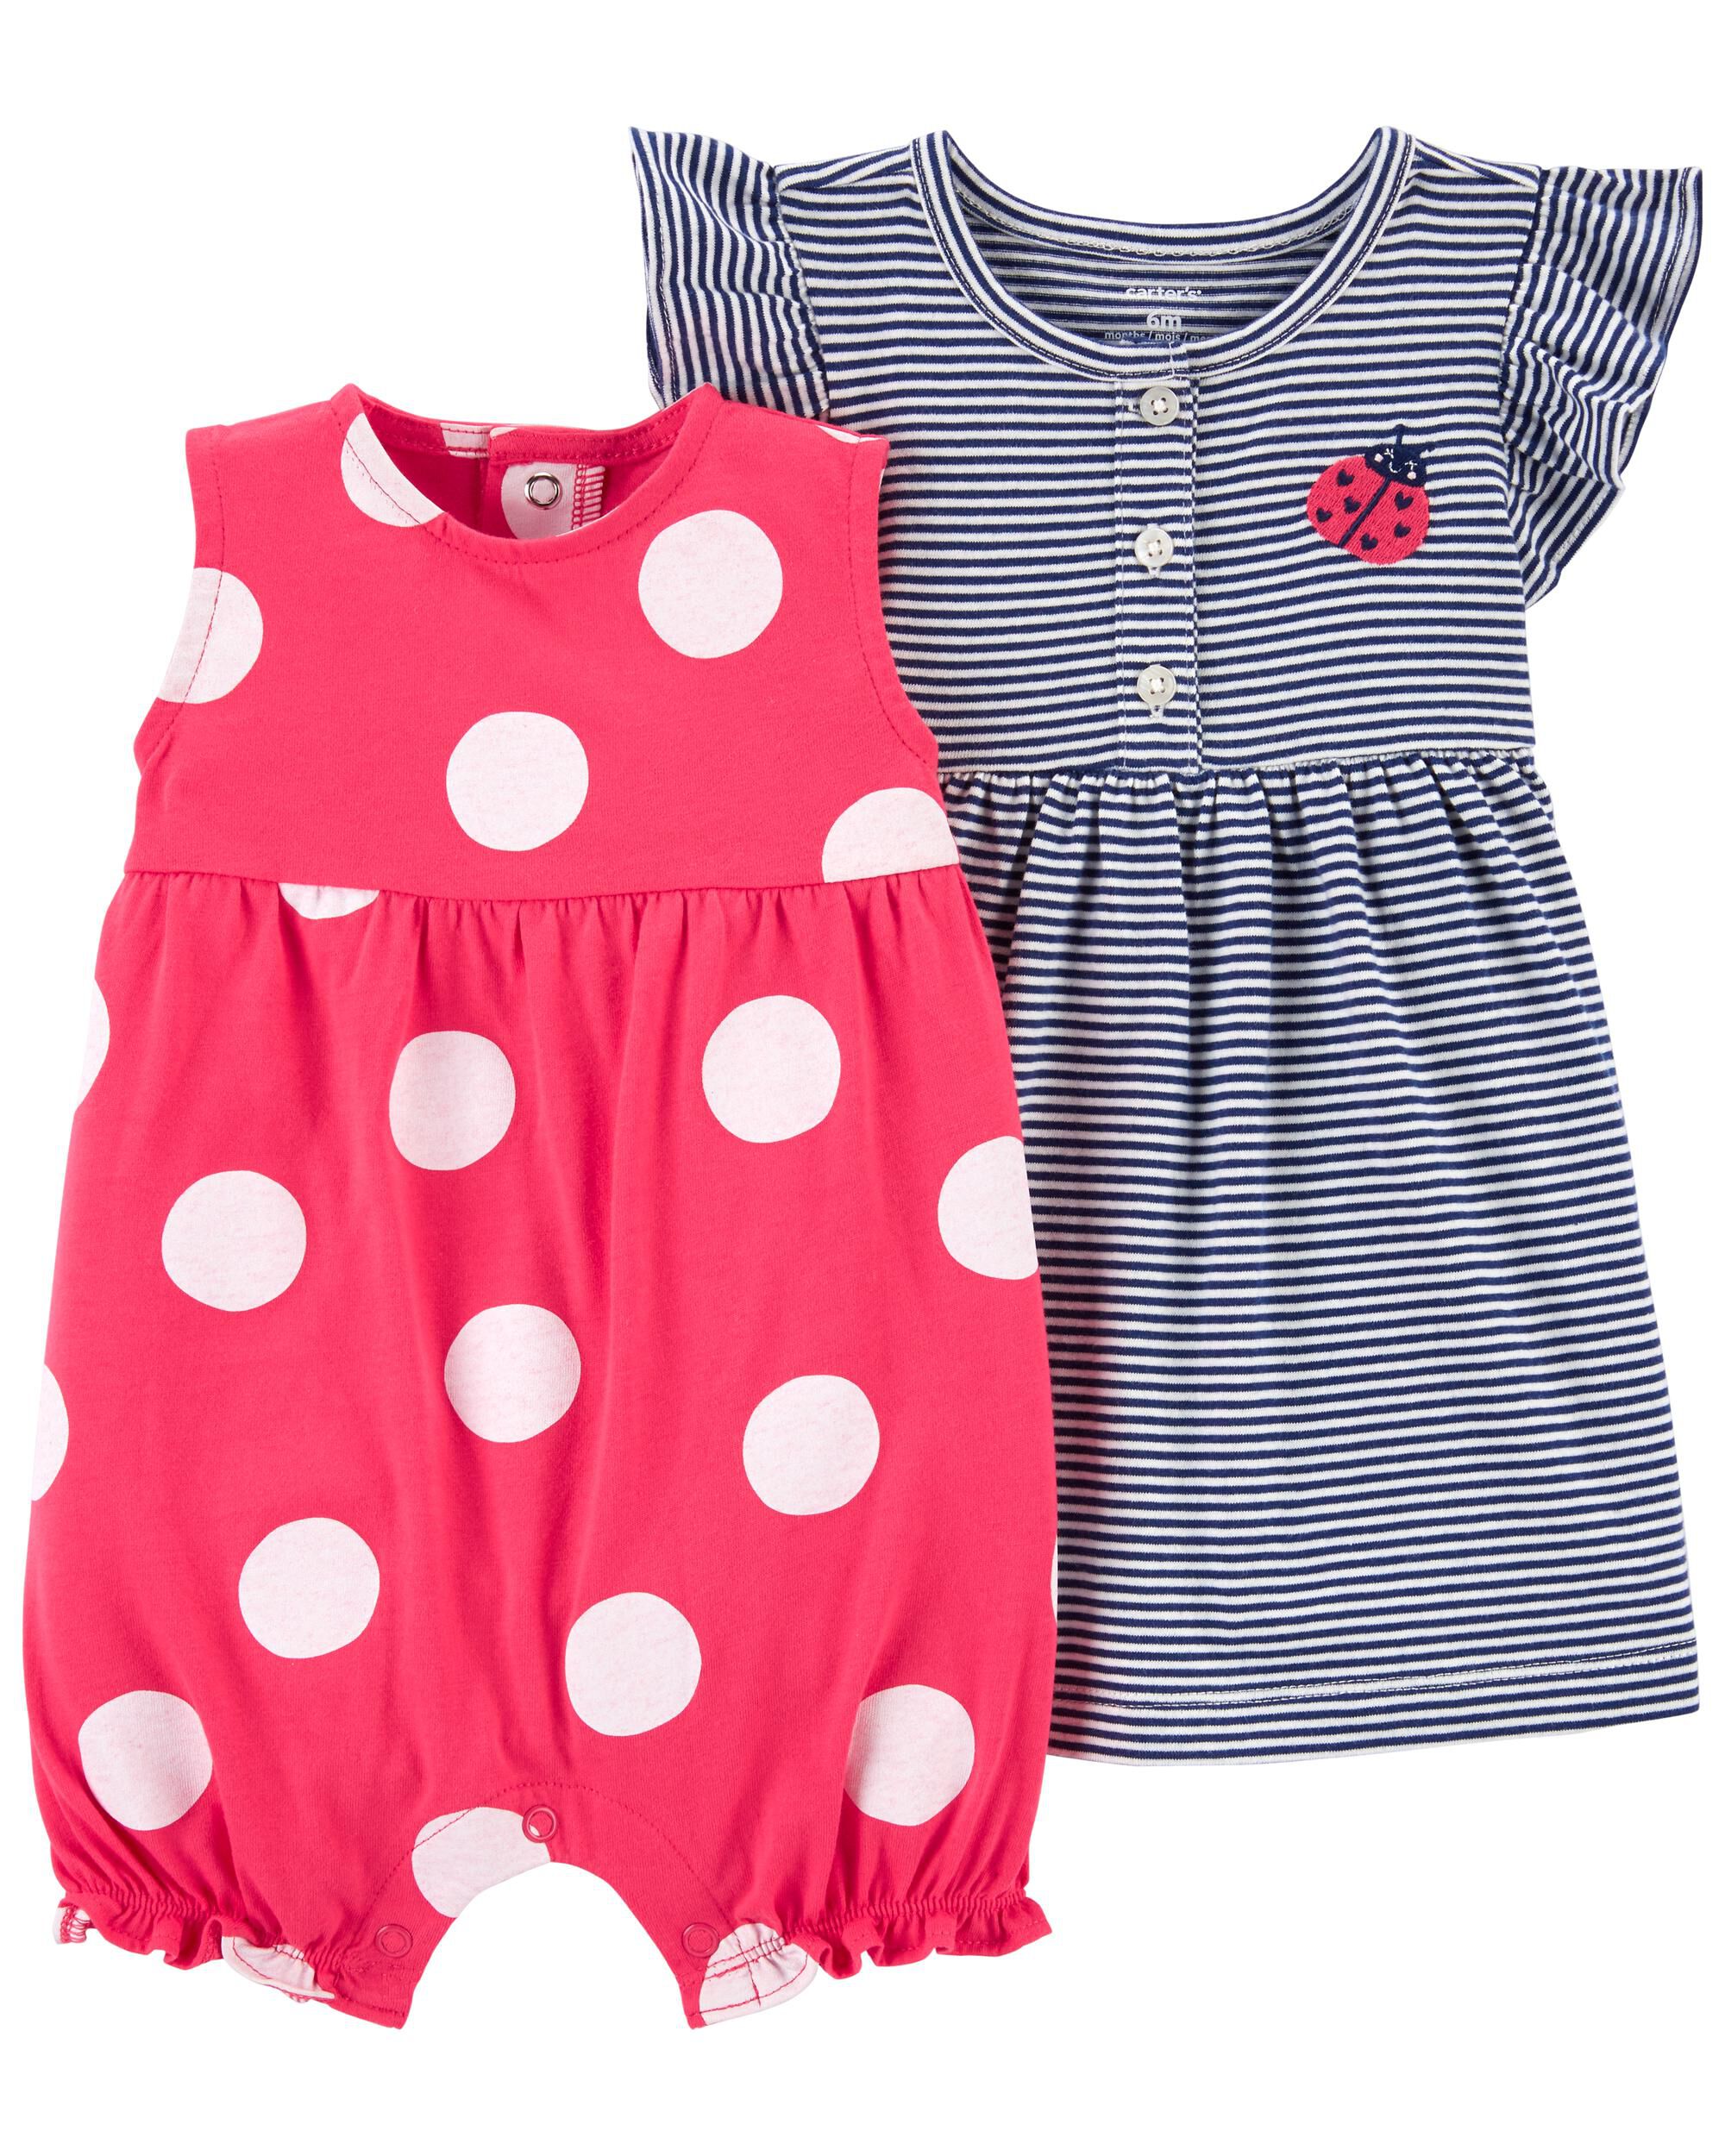 NEW CARTERS BABY GIRLS 2 PACK OUTFIT DRESS SET VARIOUS STYLES & SIZES 